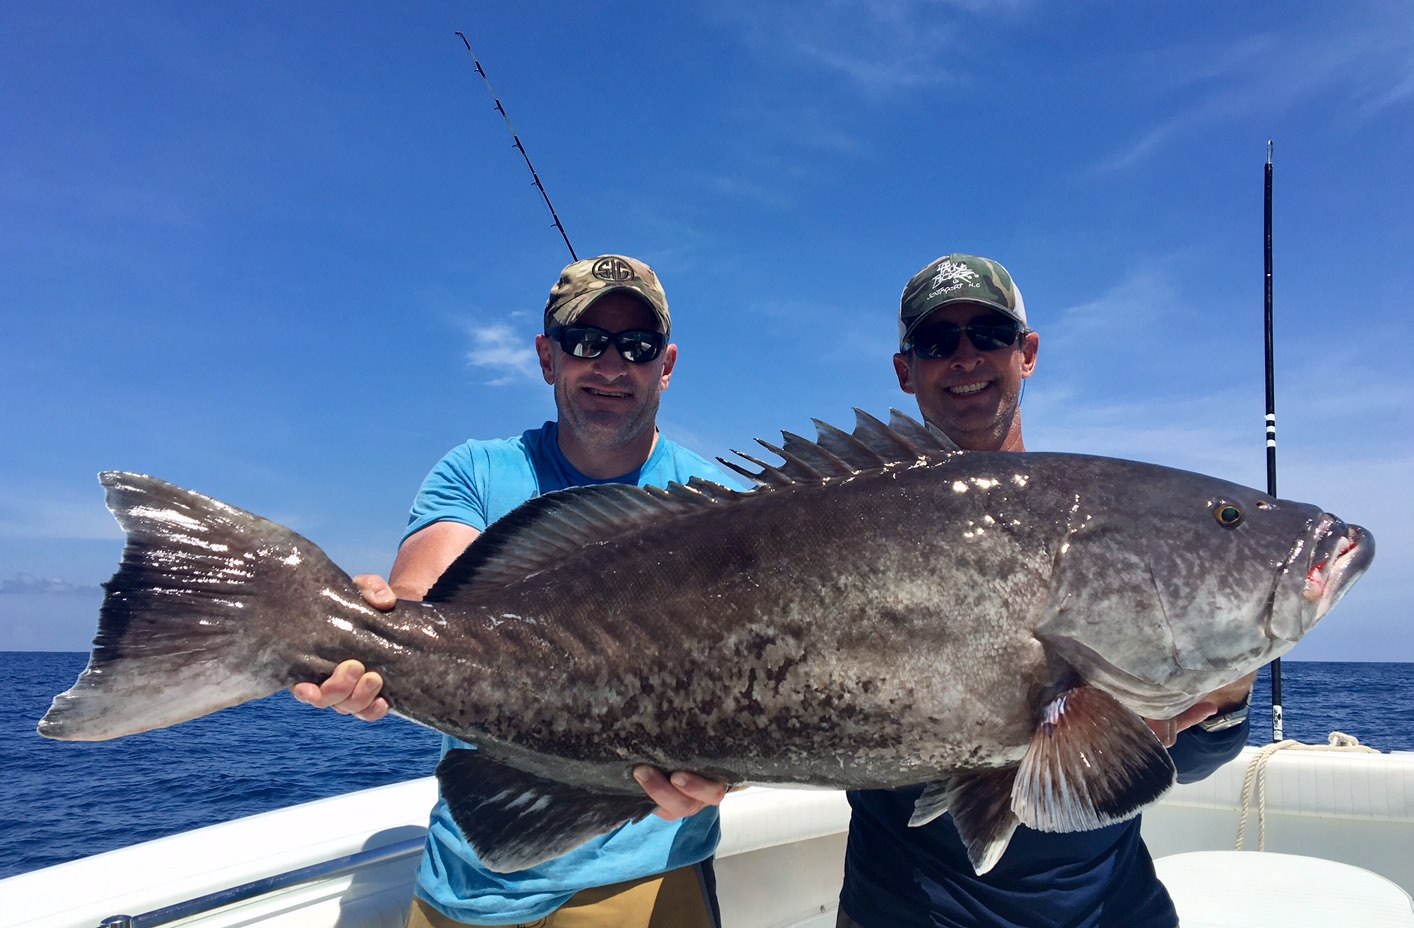 Jeremy-Wall-L-and-Capt.-Bonner-Herring-R-with-a-50-pound-gag-grouper.-.jpg